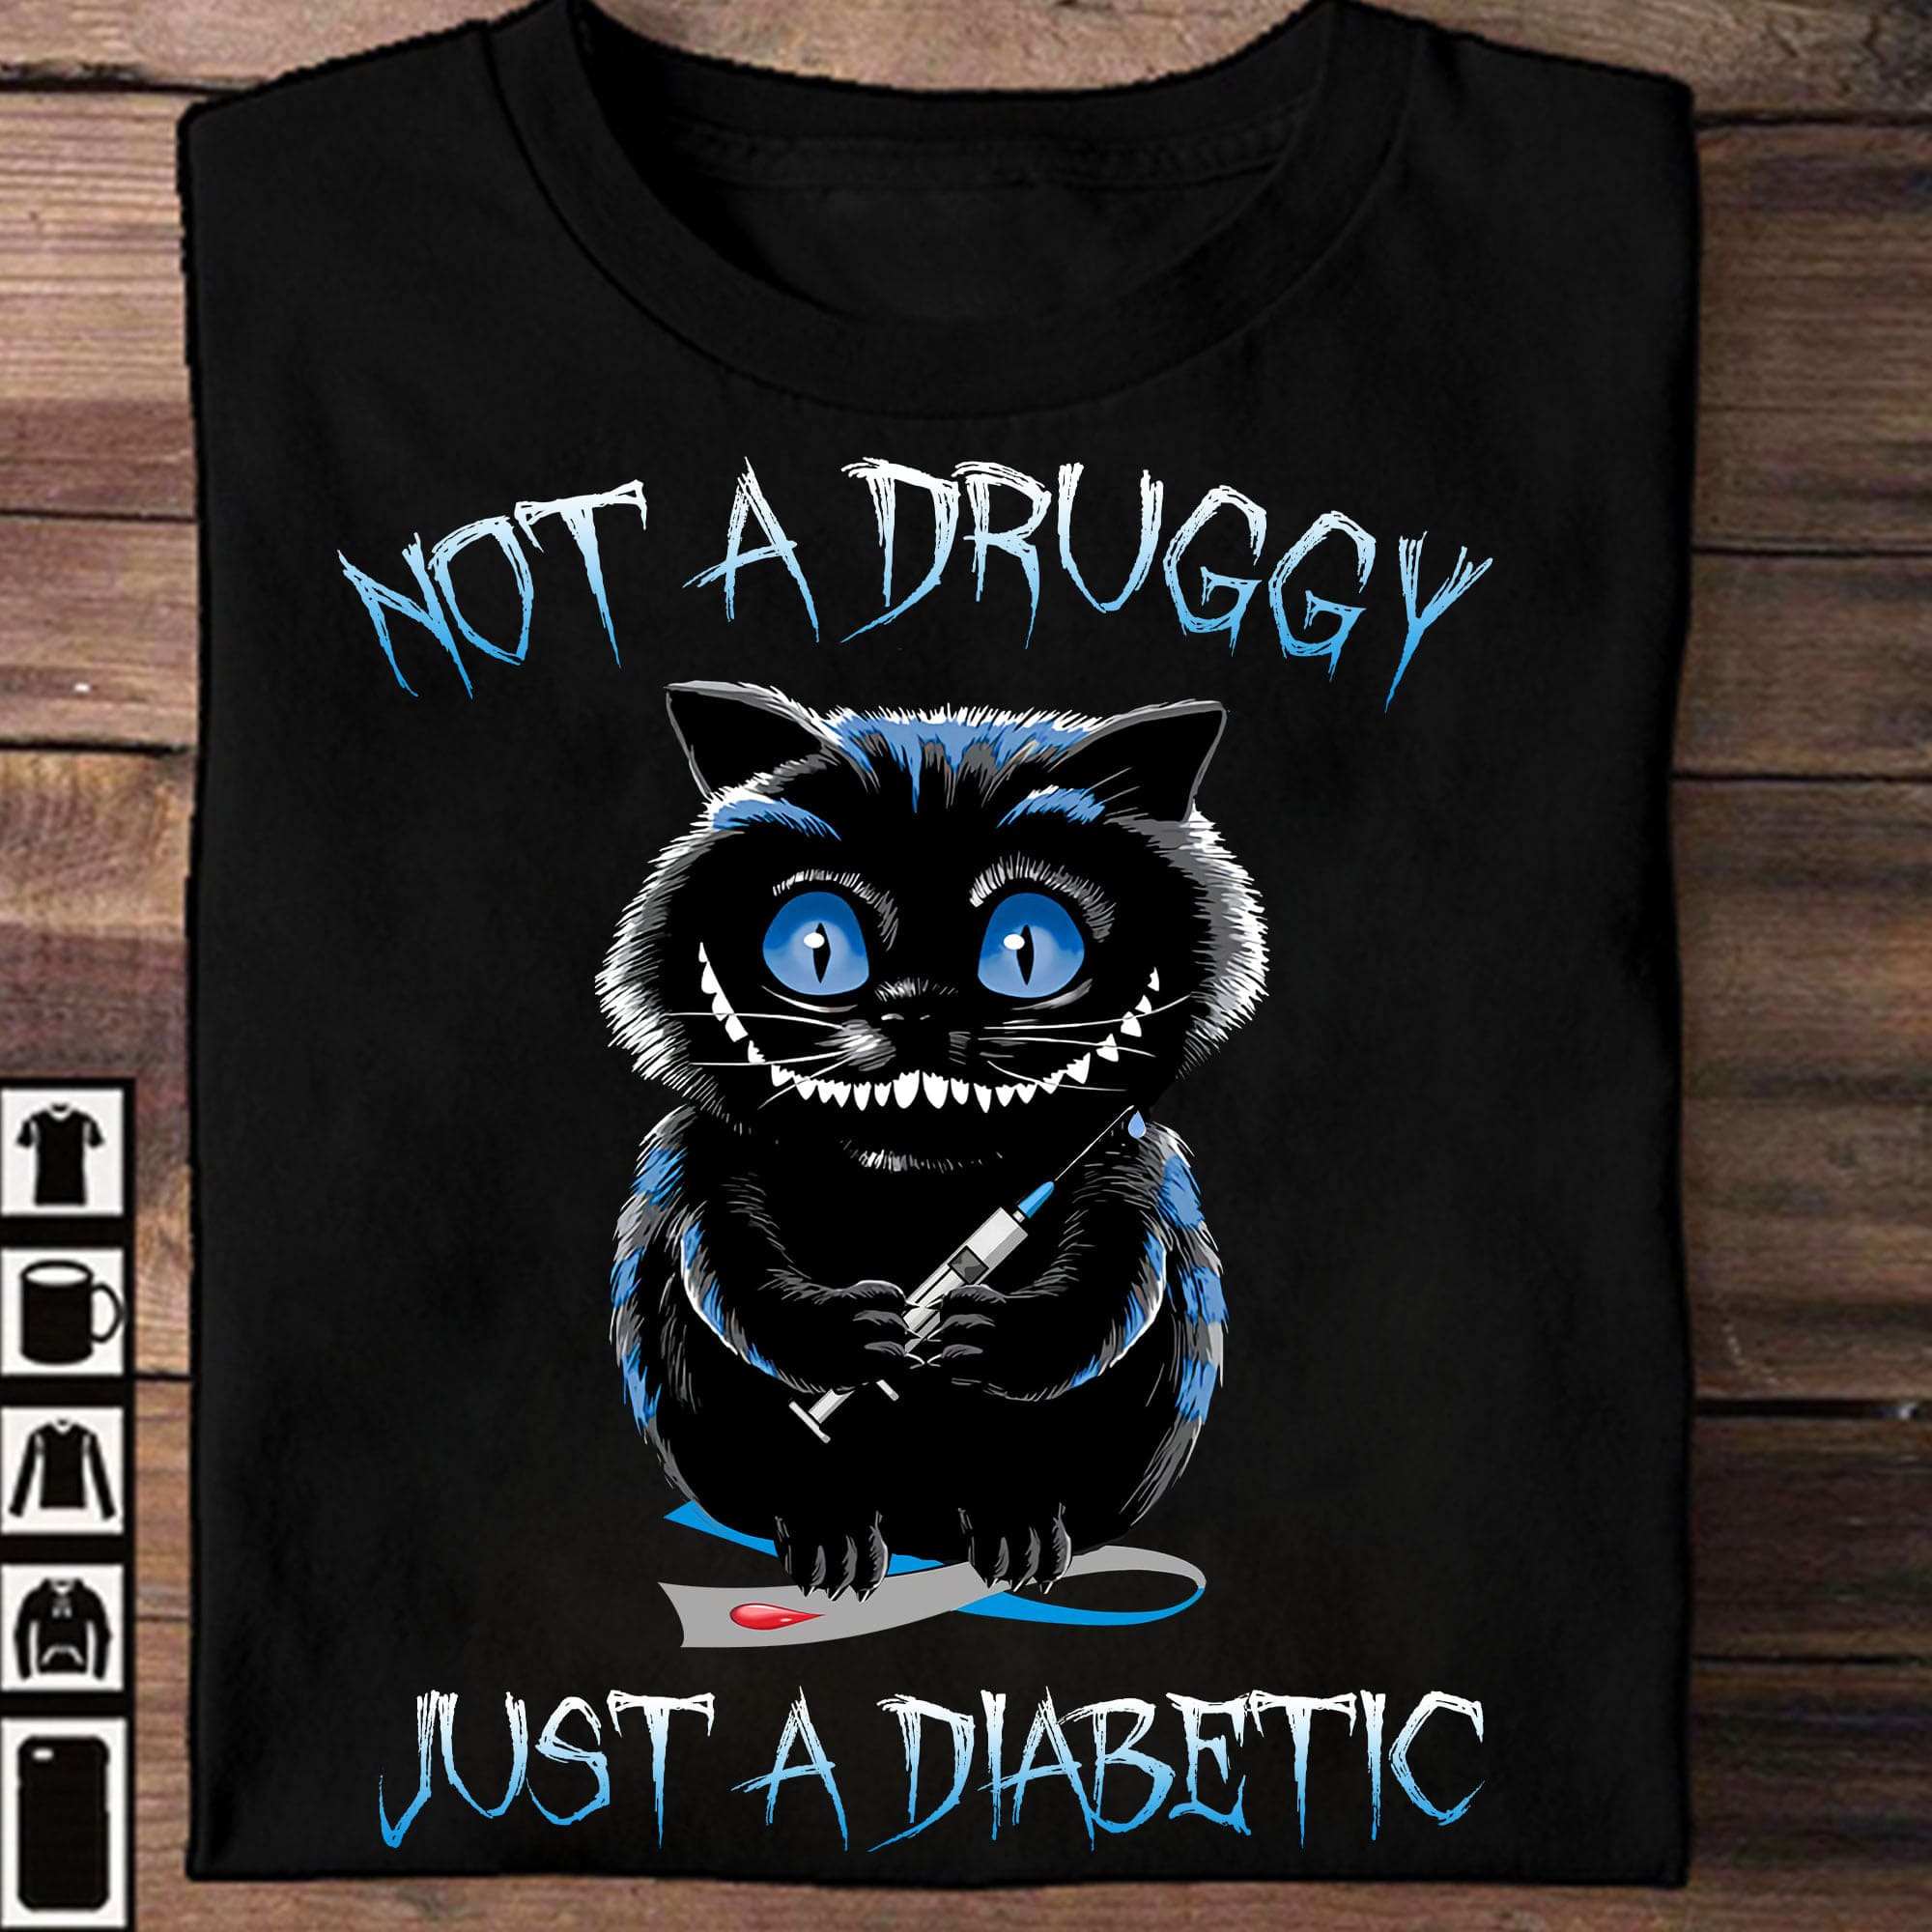 Not a druggy, just a diabetic - Chesire cat diabetes, diabetes awareness